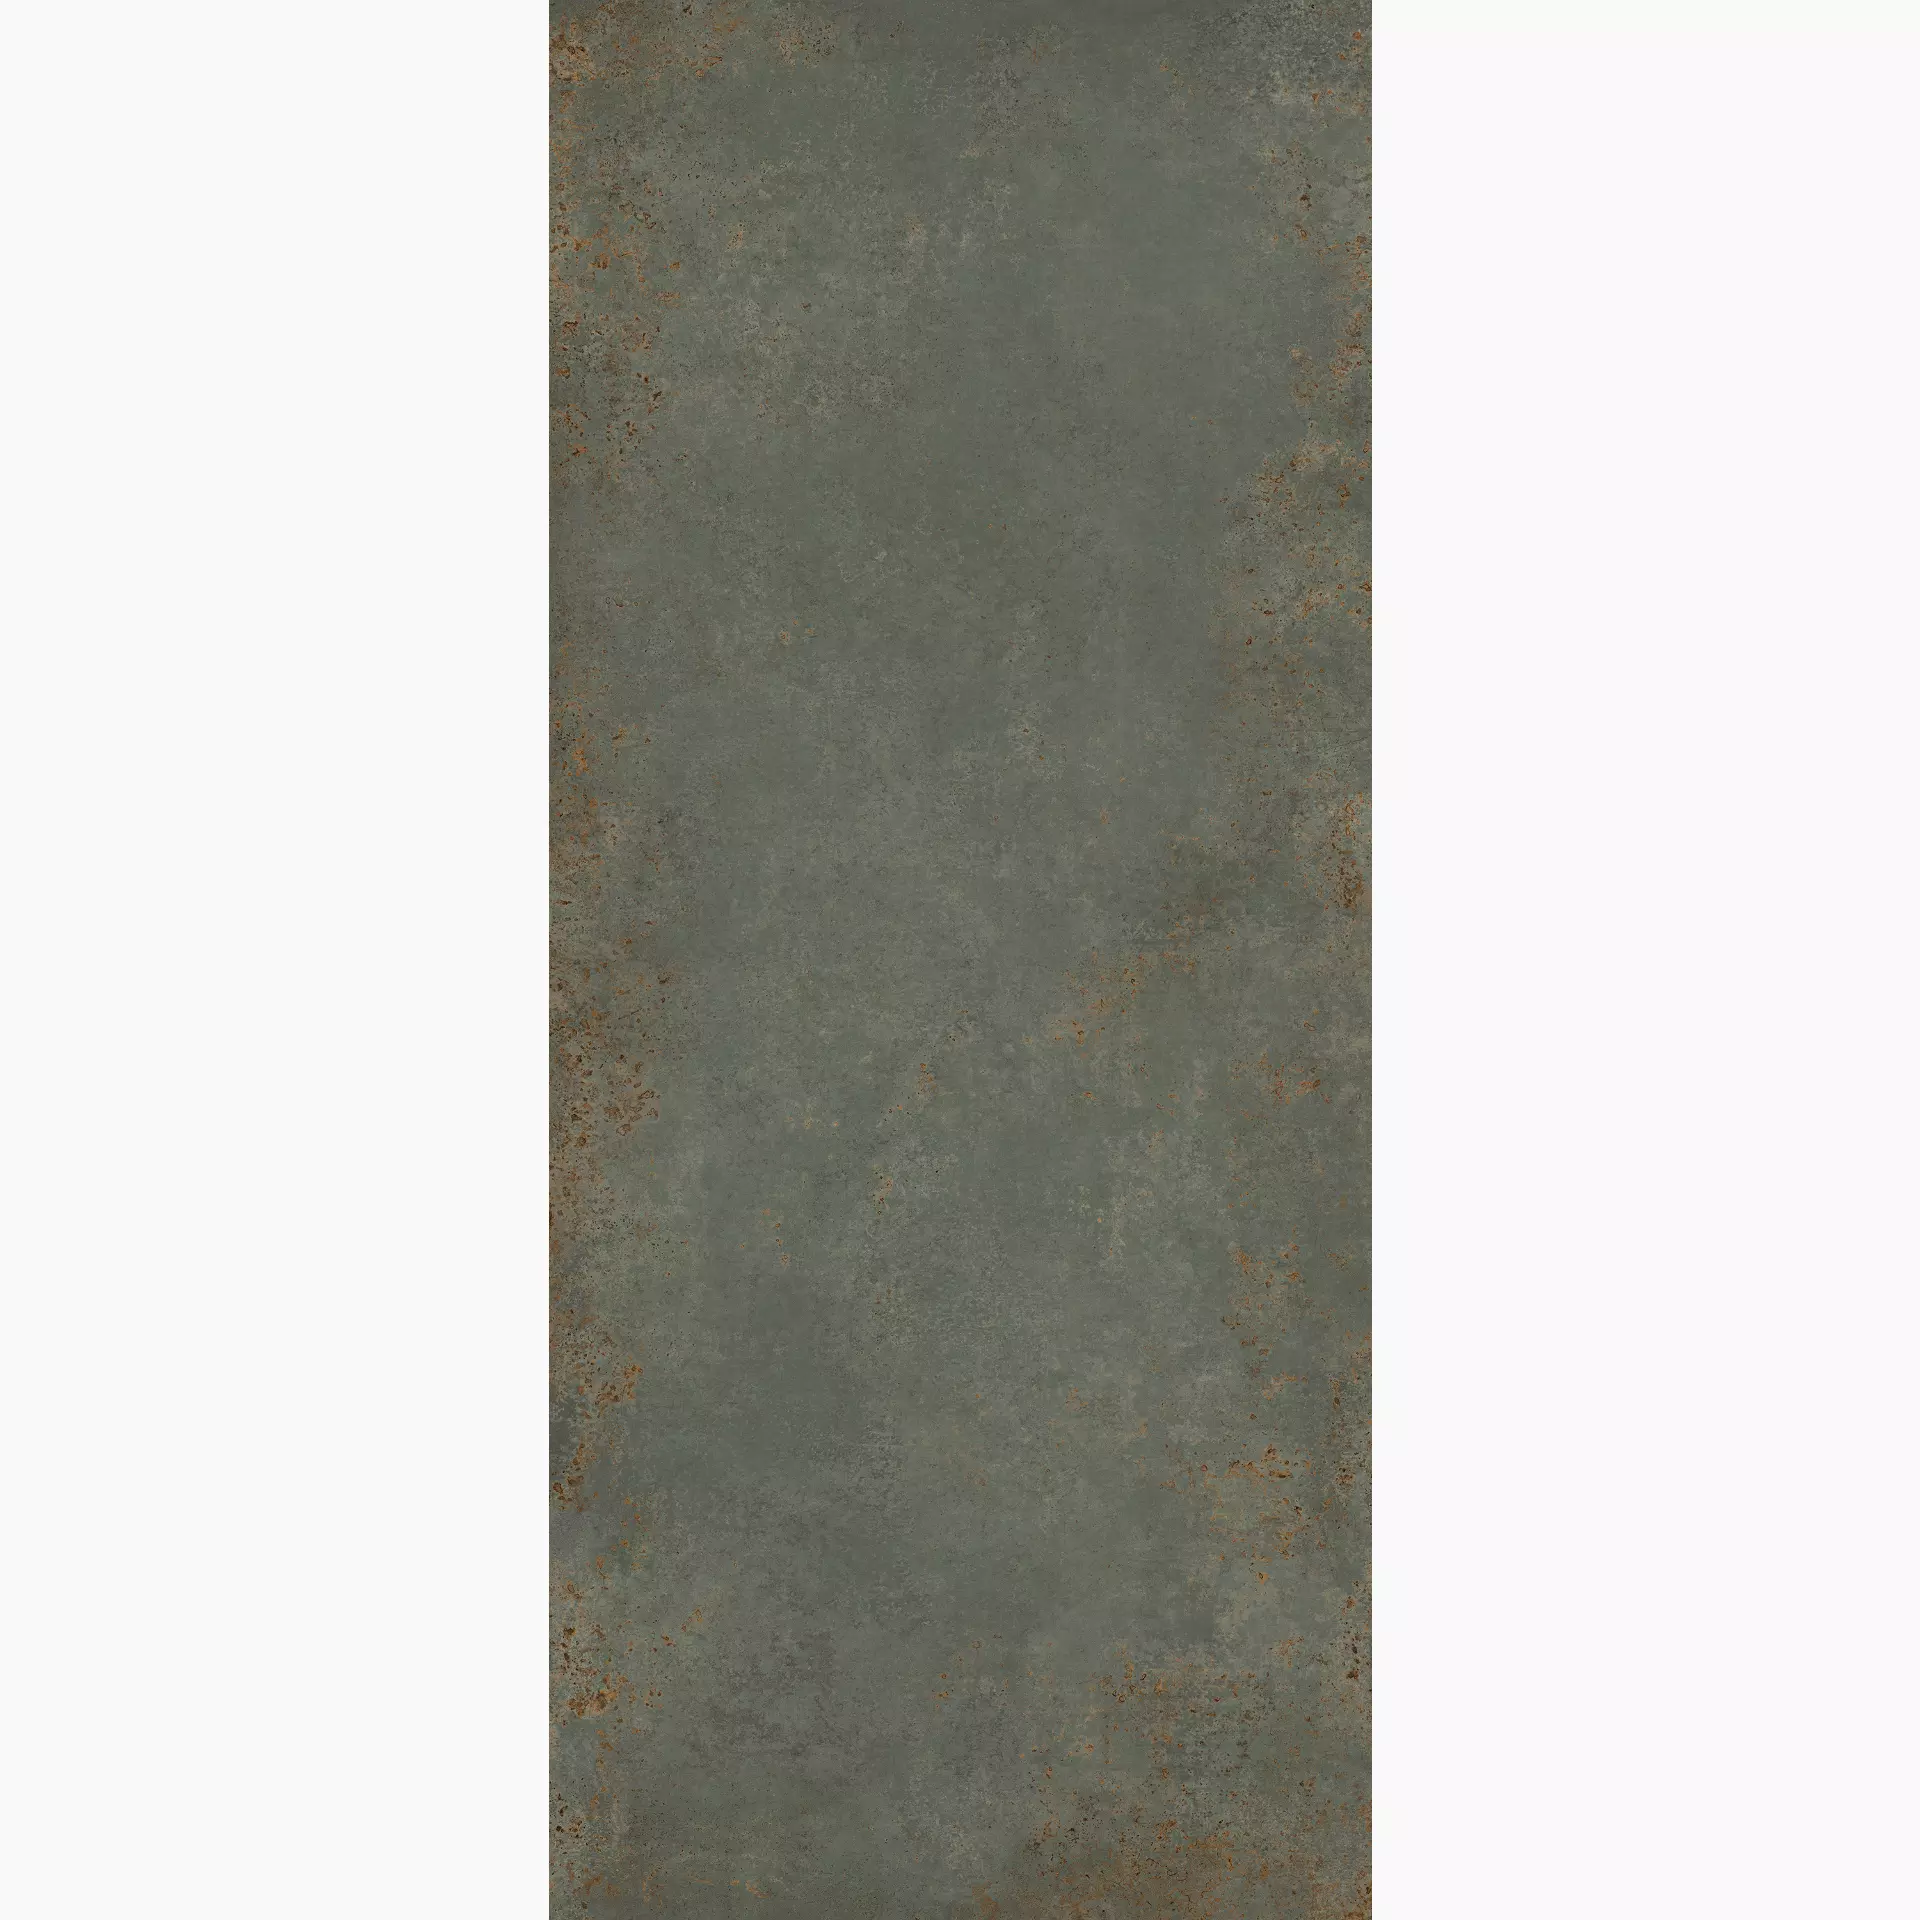 Tagina Metal Oxide Naturale 124041 120x280cm rectified 6,5mm